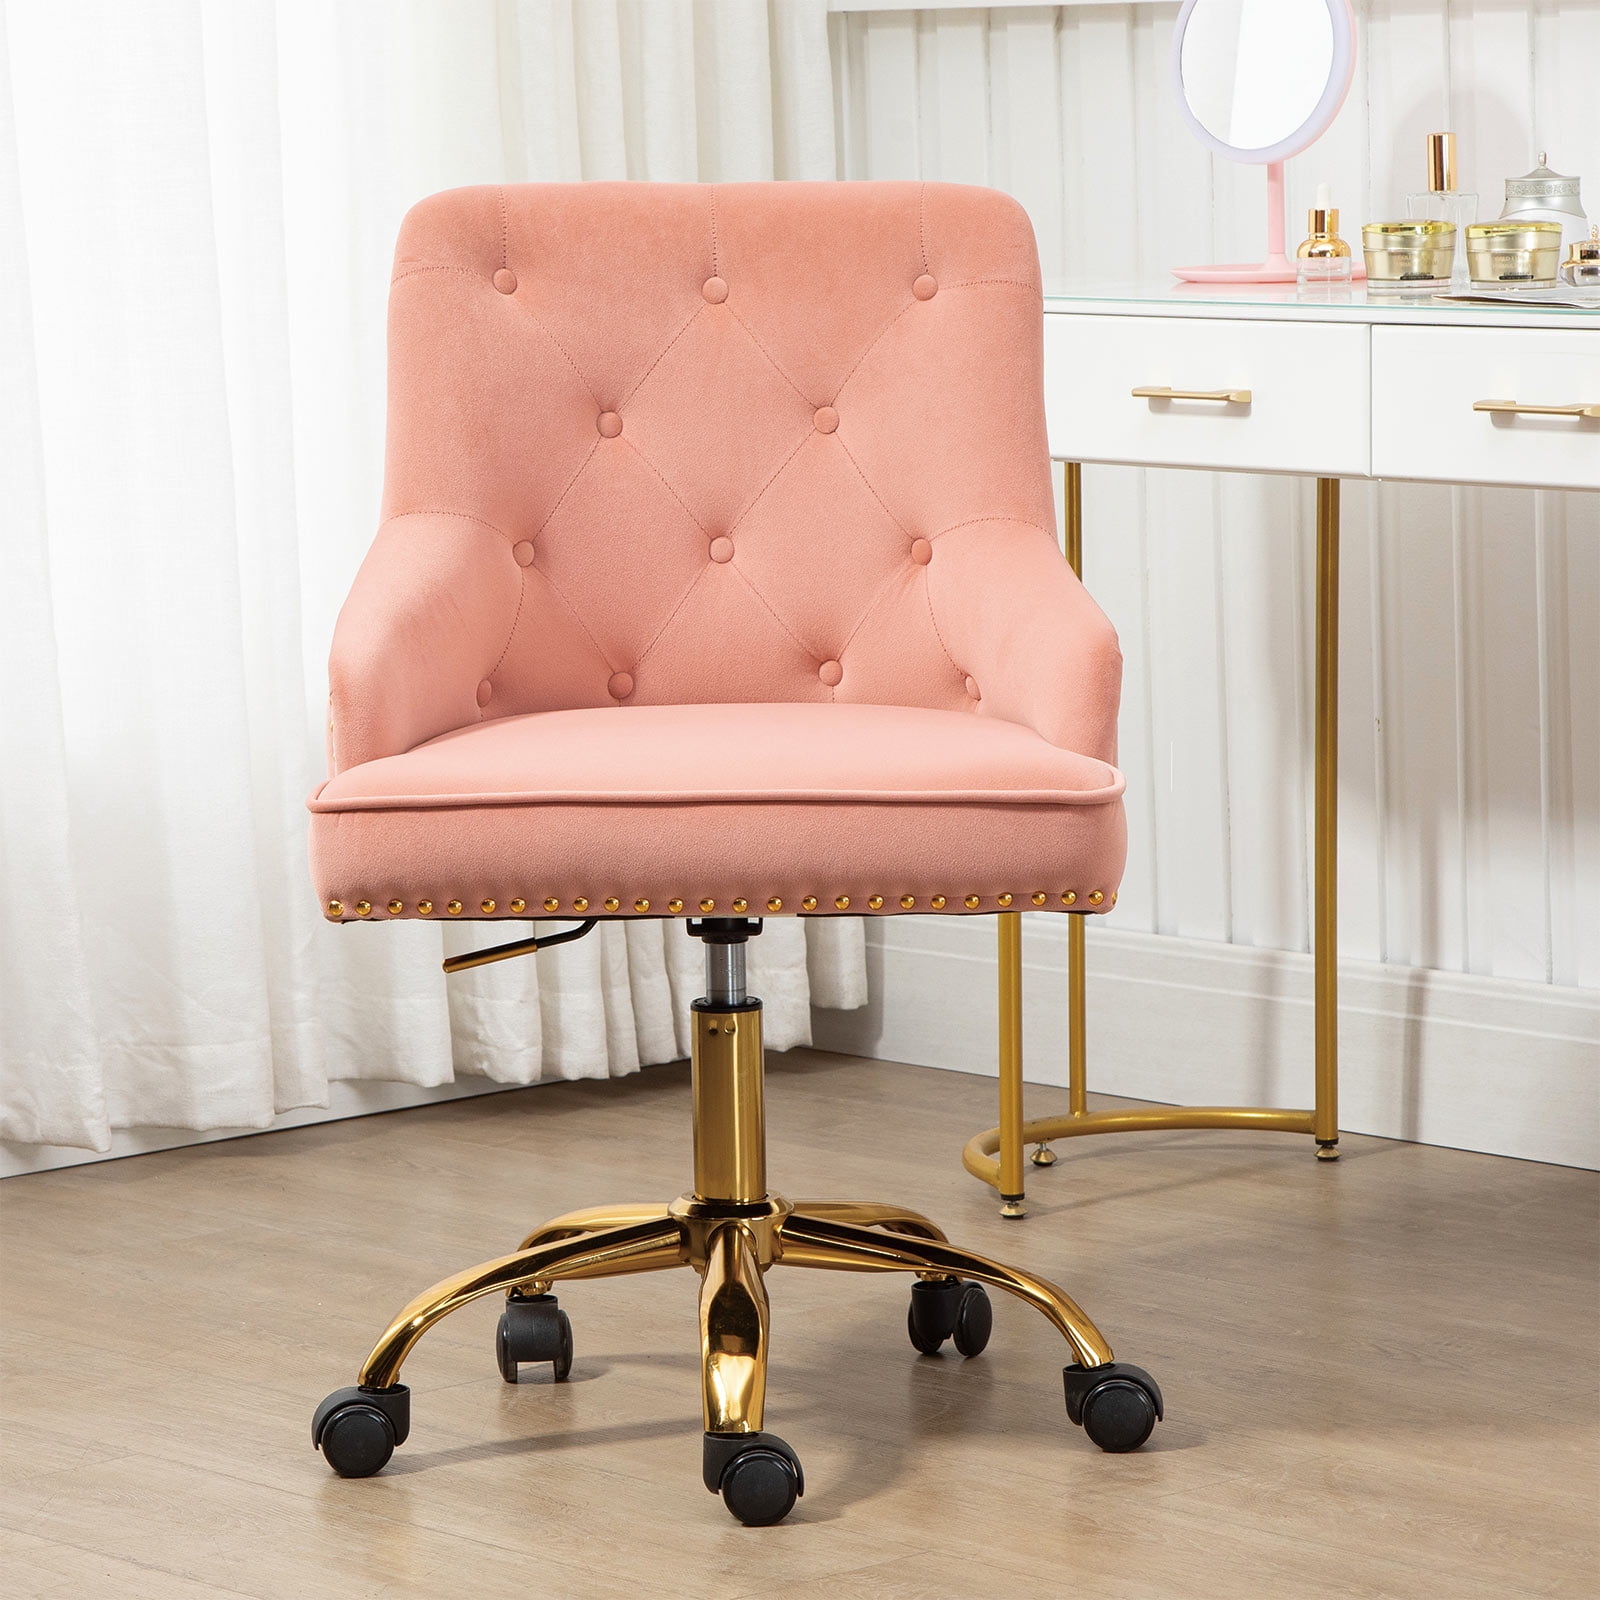 2* Faux Leather/PU Computer Desk Chair Home Office Study Chairs Pink+white 